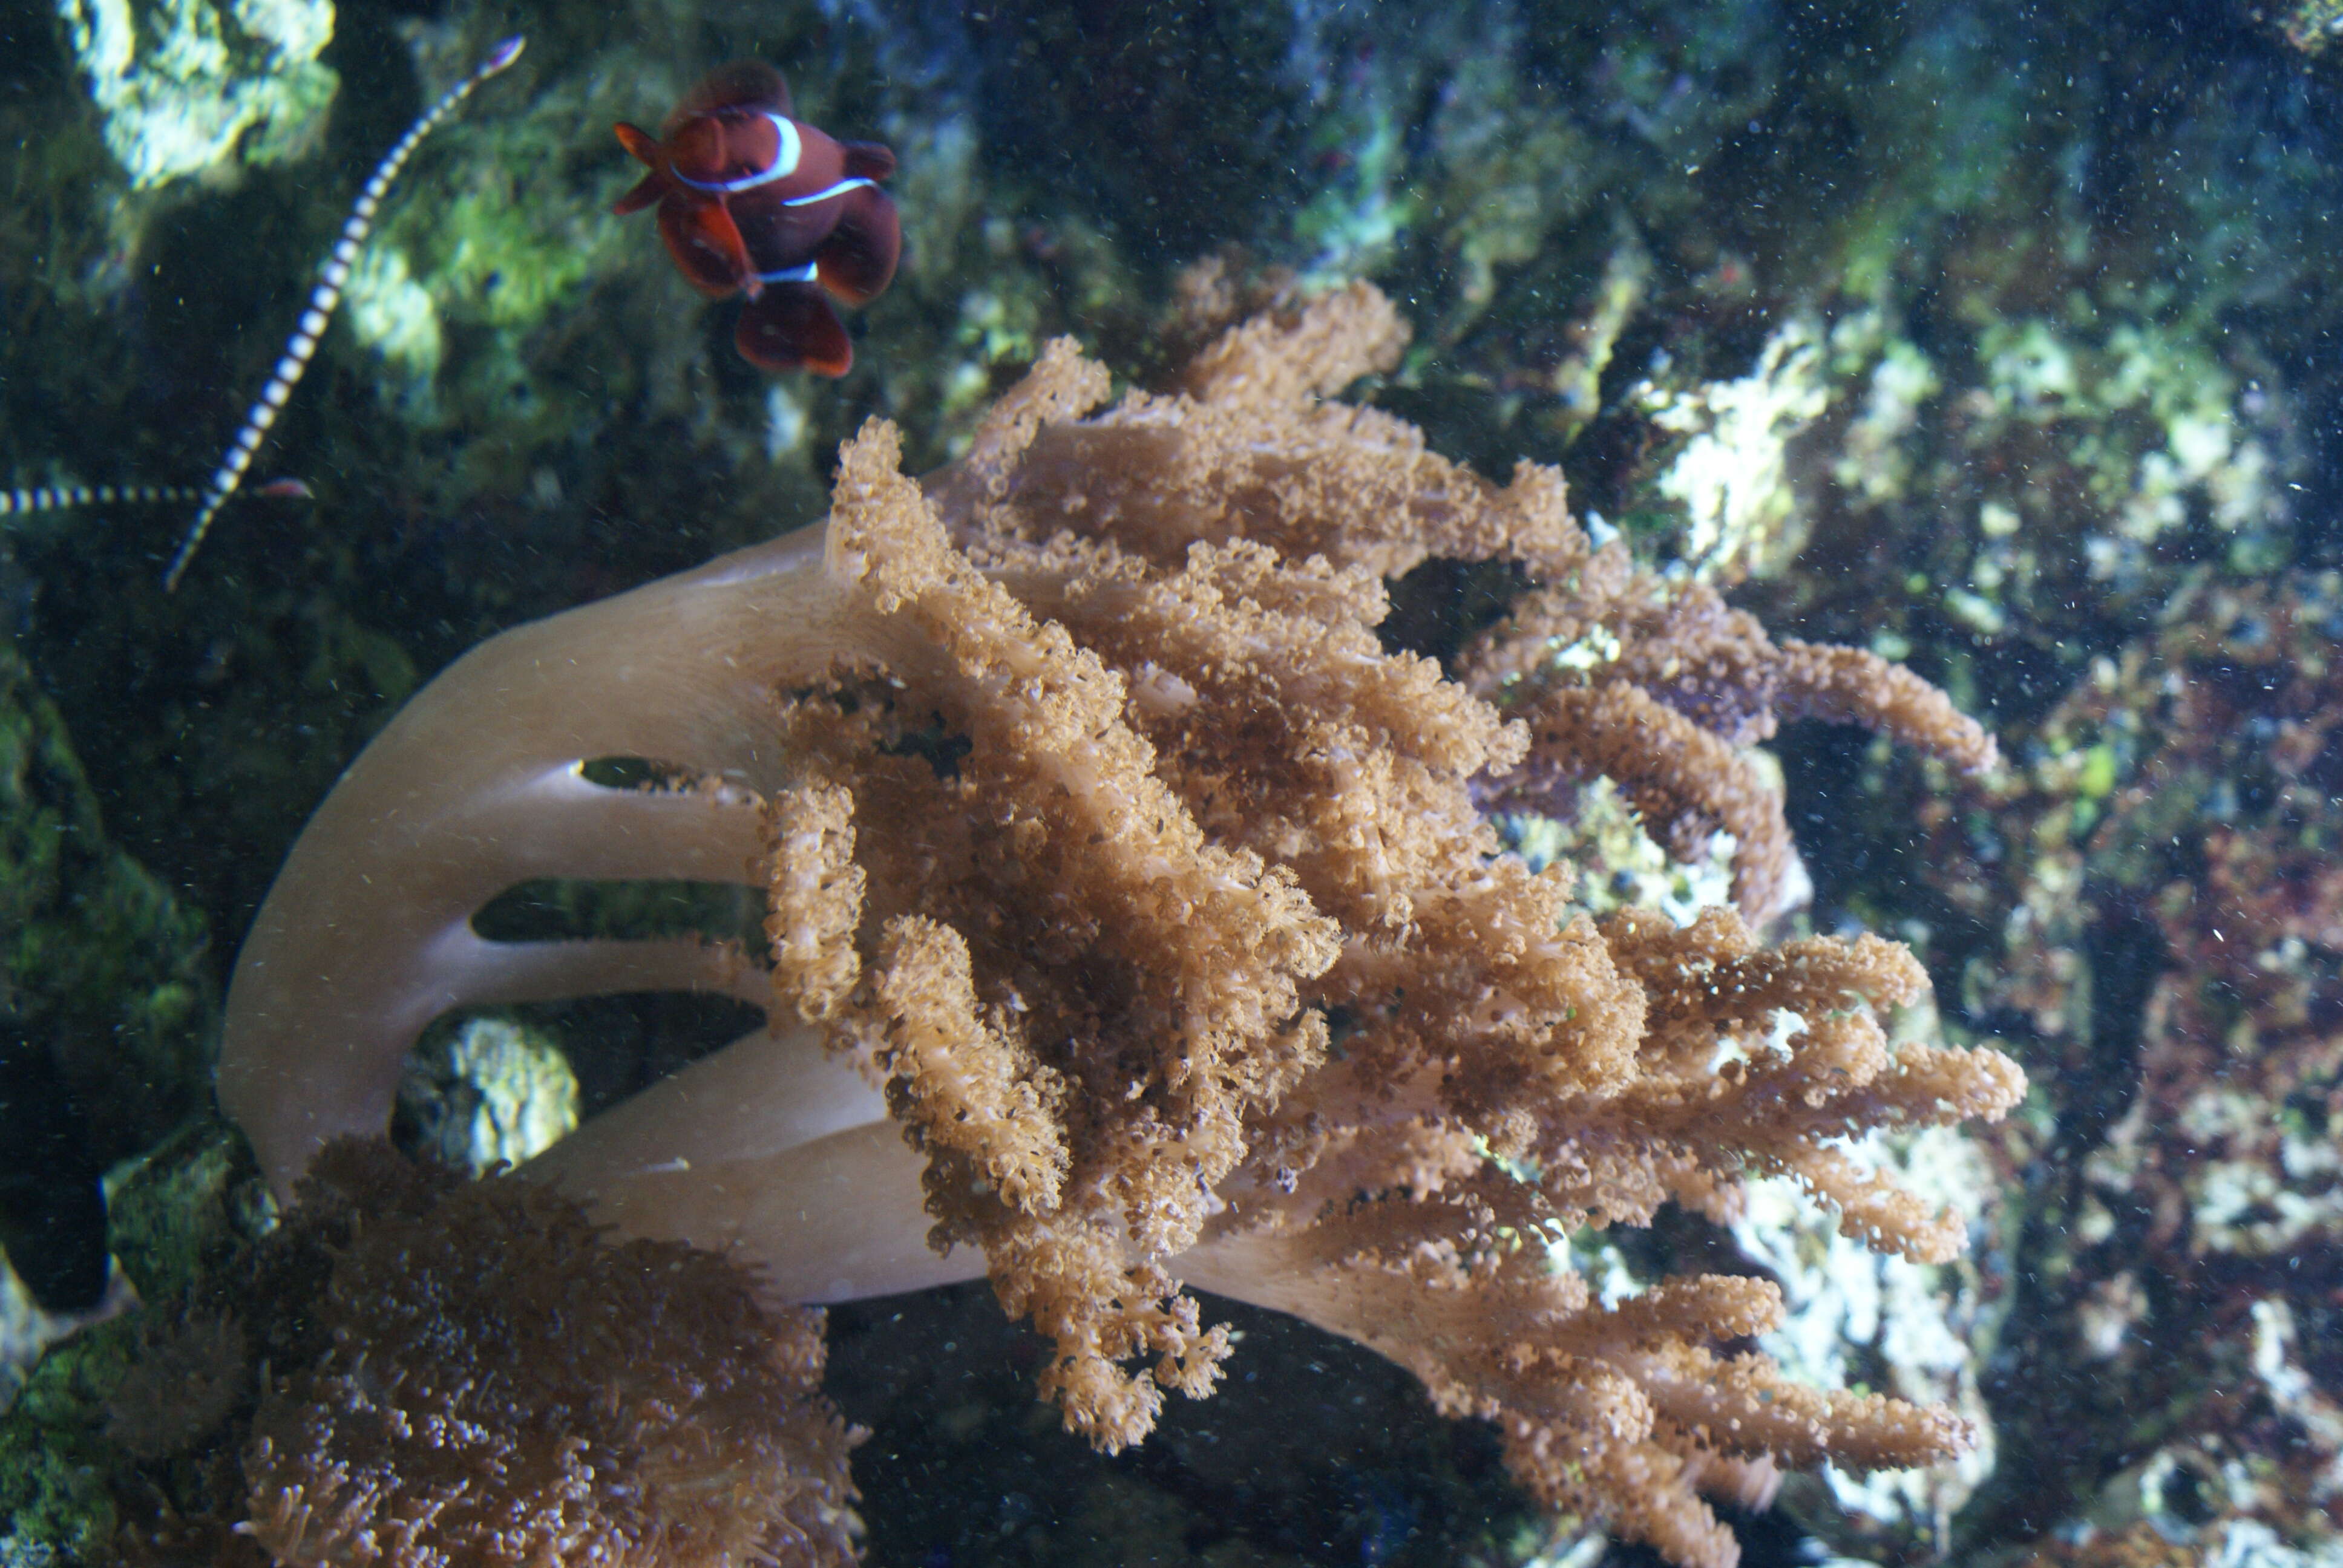 Image of Colour change coral